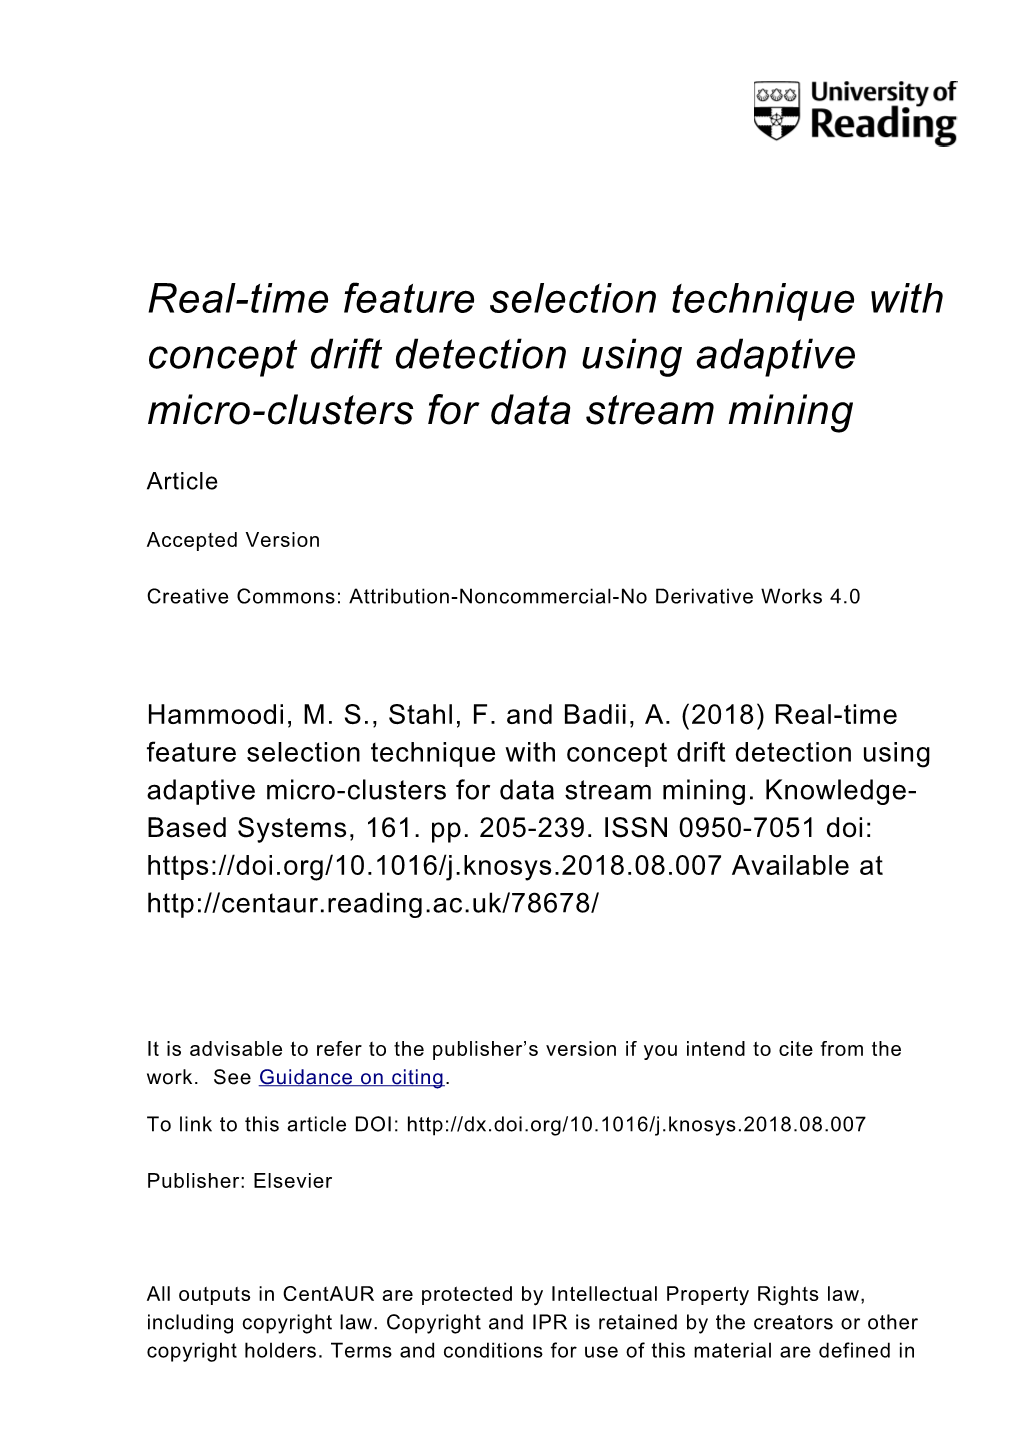 Real-Time Feature Selection Technique with Concept Drift Detection Using Adaptive Micro-Clusters for Data Stream Mining